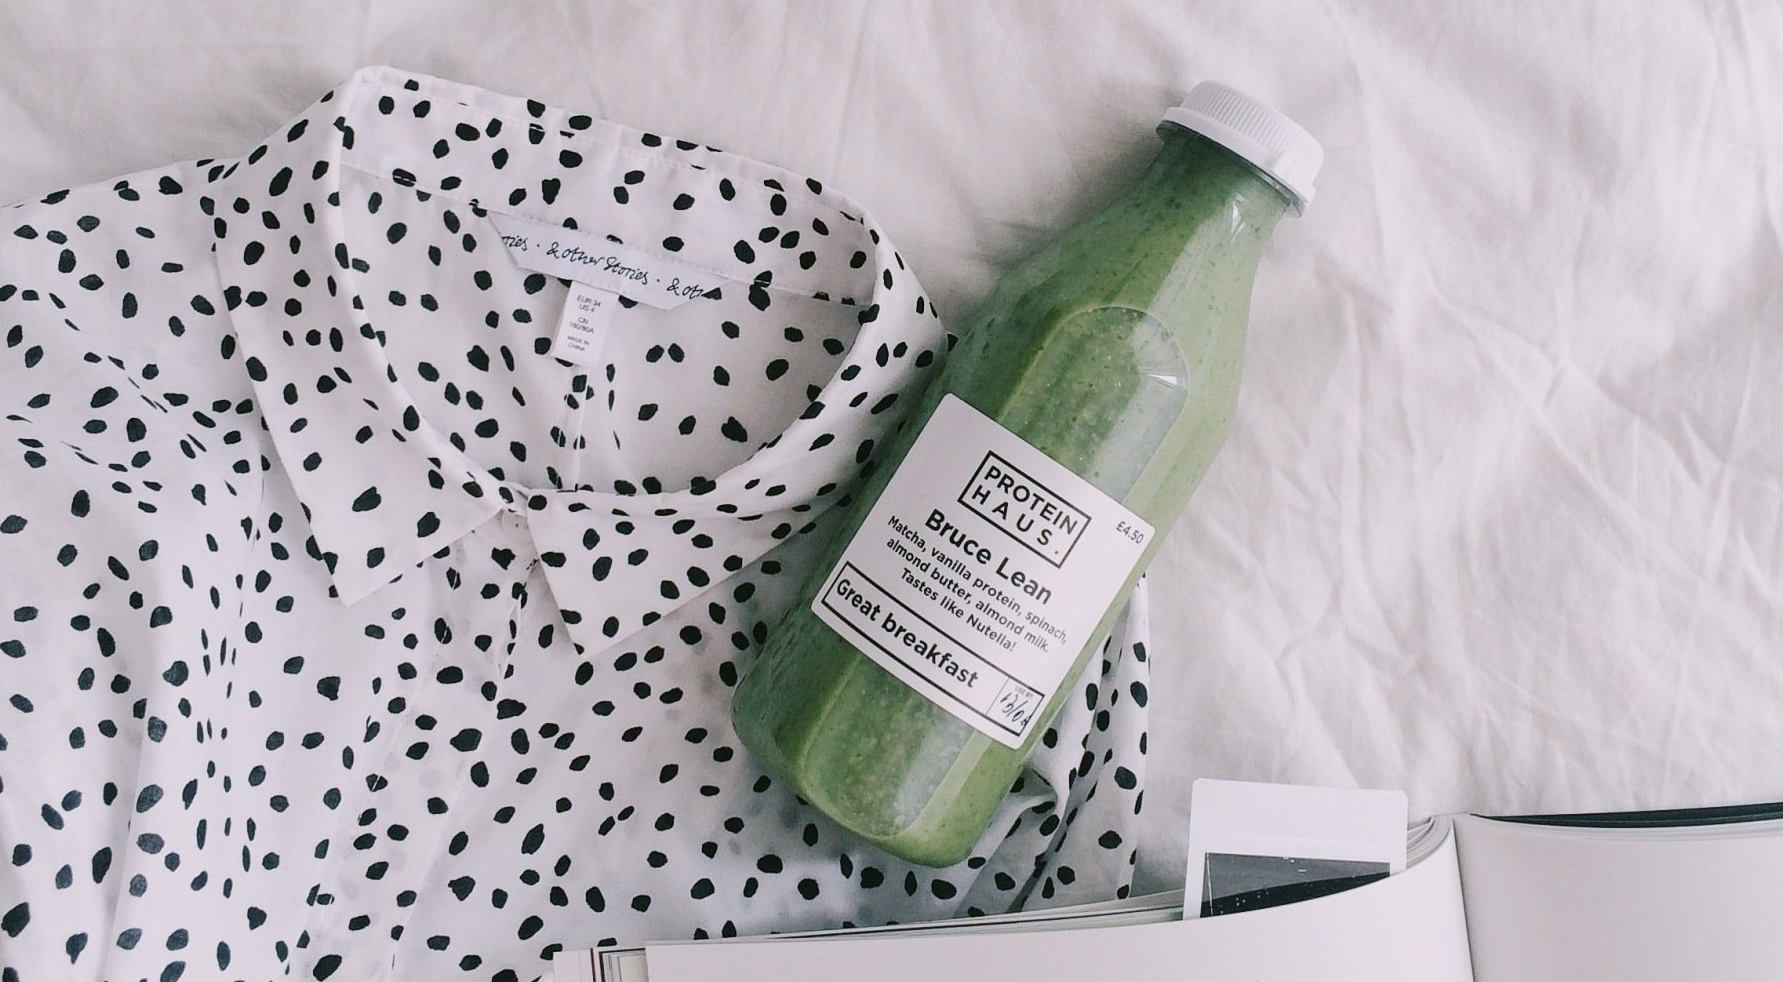 Bottle of breakfast CBD juice next to a polka-dotted shirt.